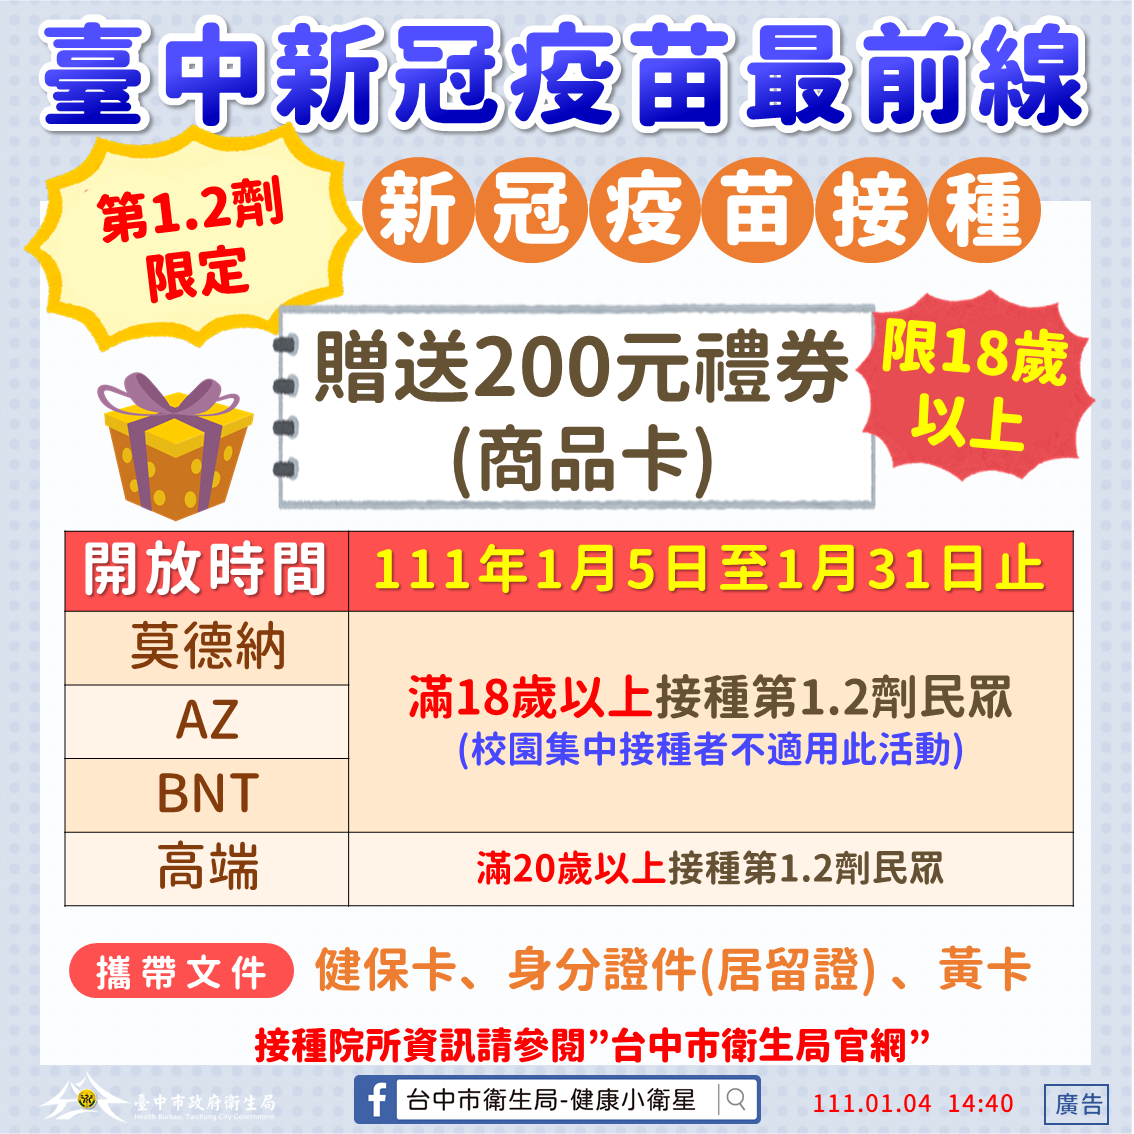 Taichung City Government’s additional vaccine incentive